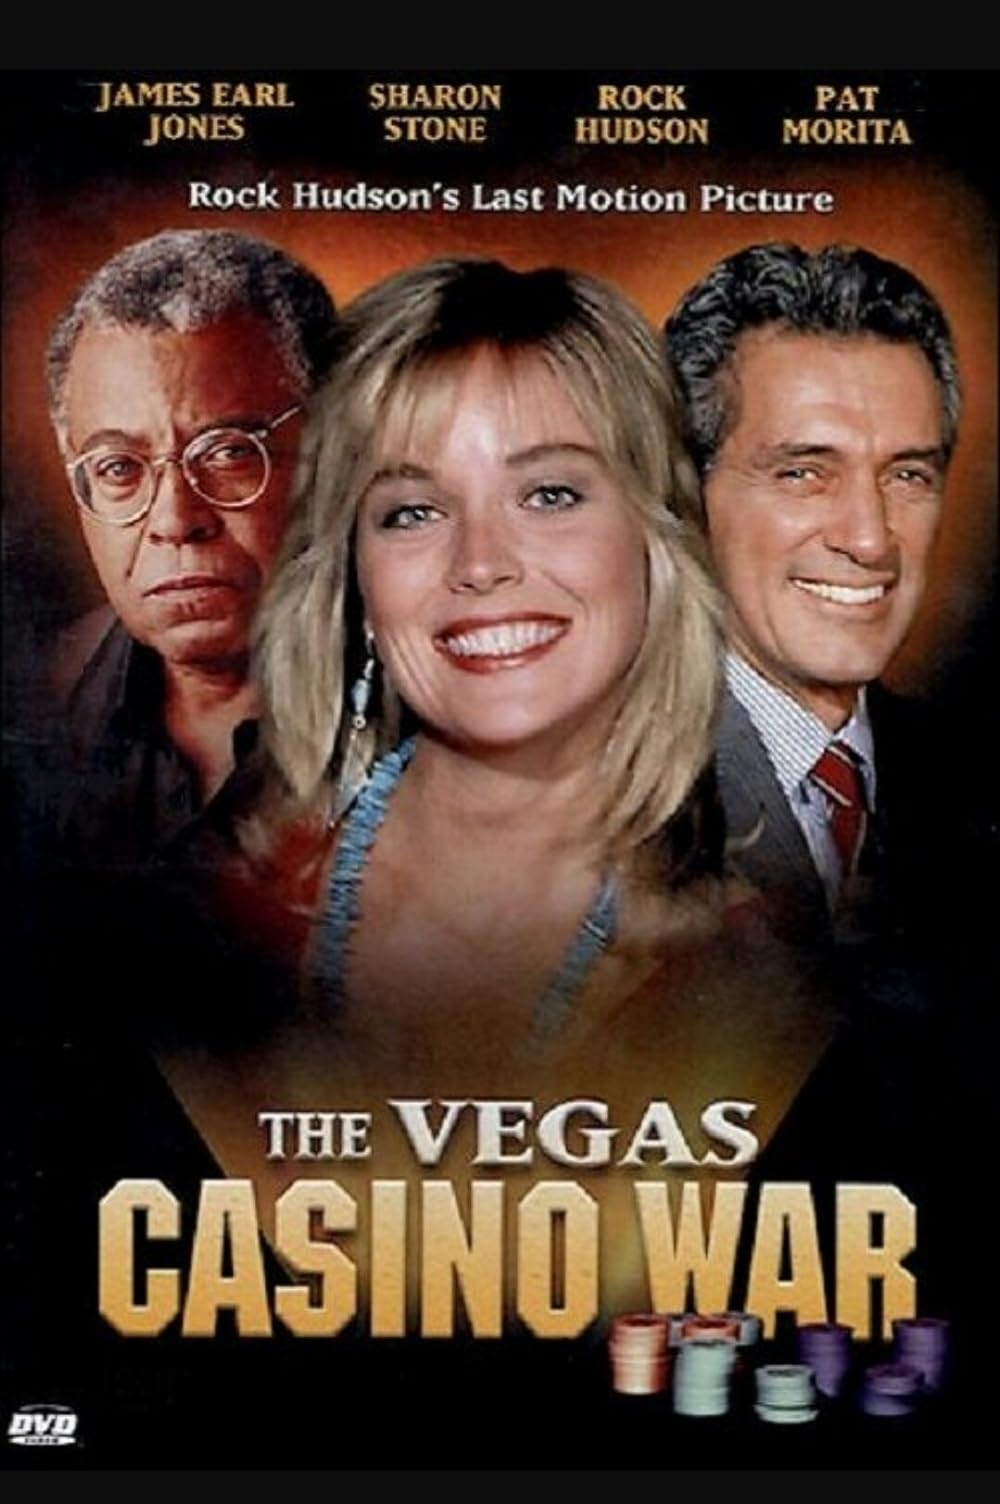 Are there any famous Casino War movies or TV shows?